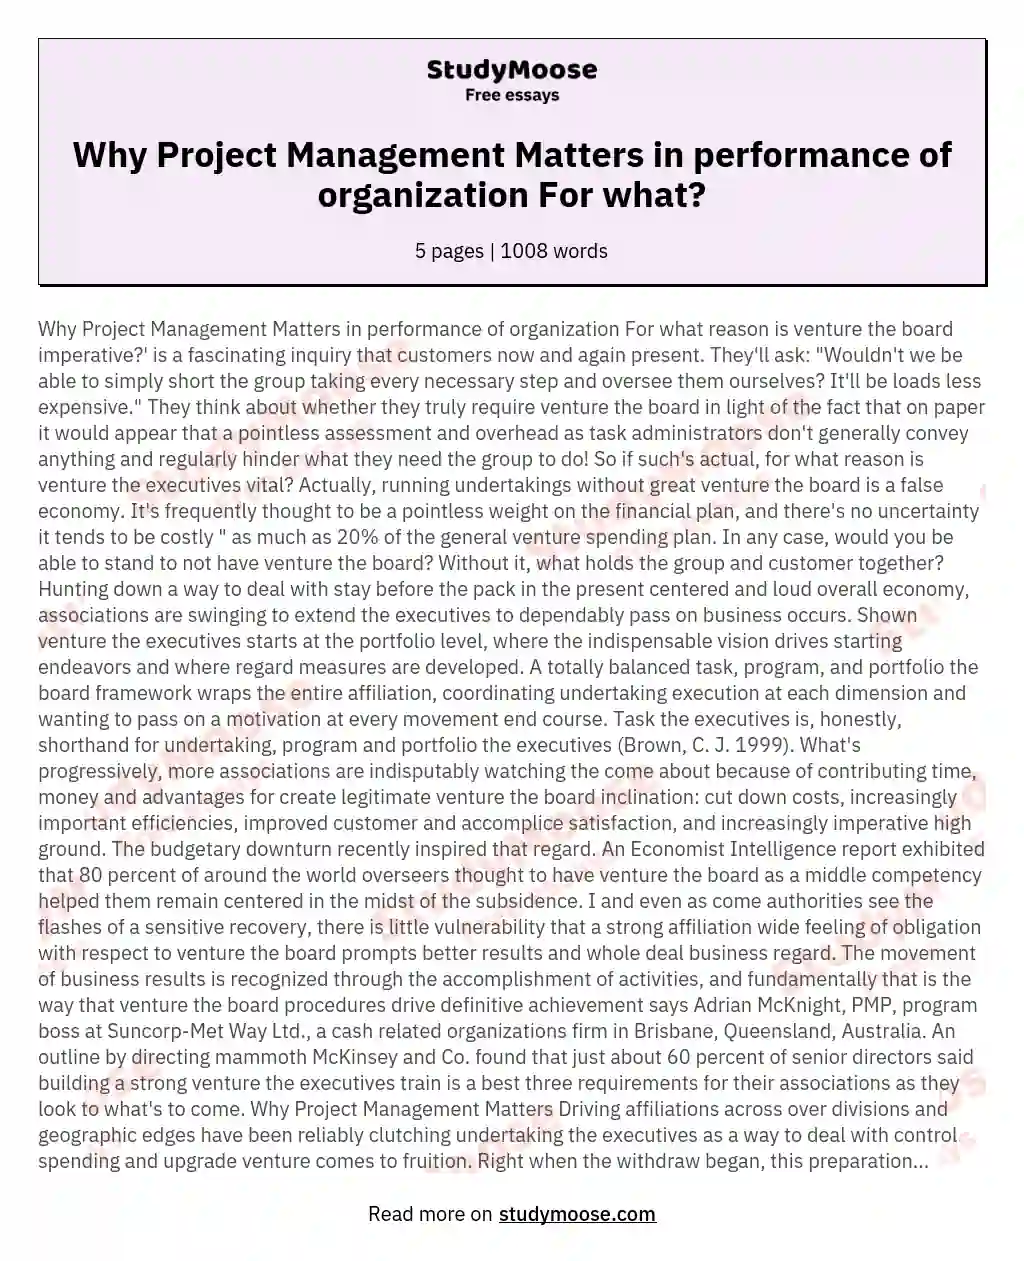 Why Project Management Matters in performance of organization For what? essay